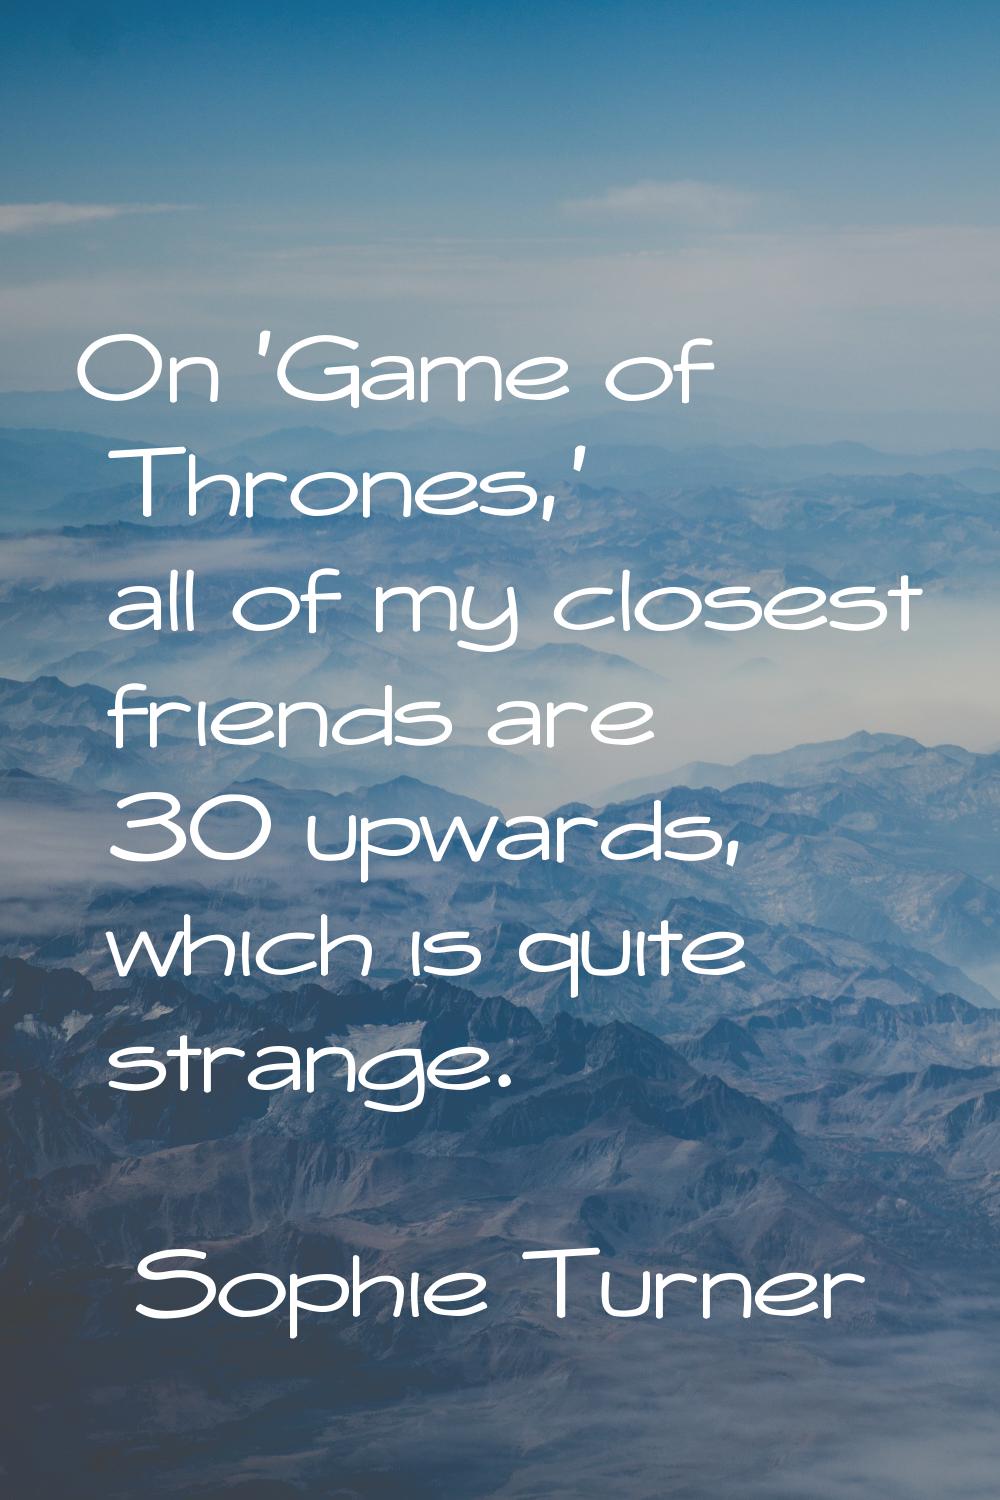 On 'Game of Thrones,' all of my closest friends are 30 upwards, which is quite strange.